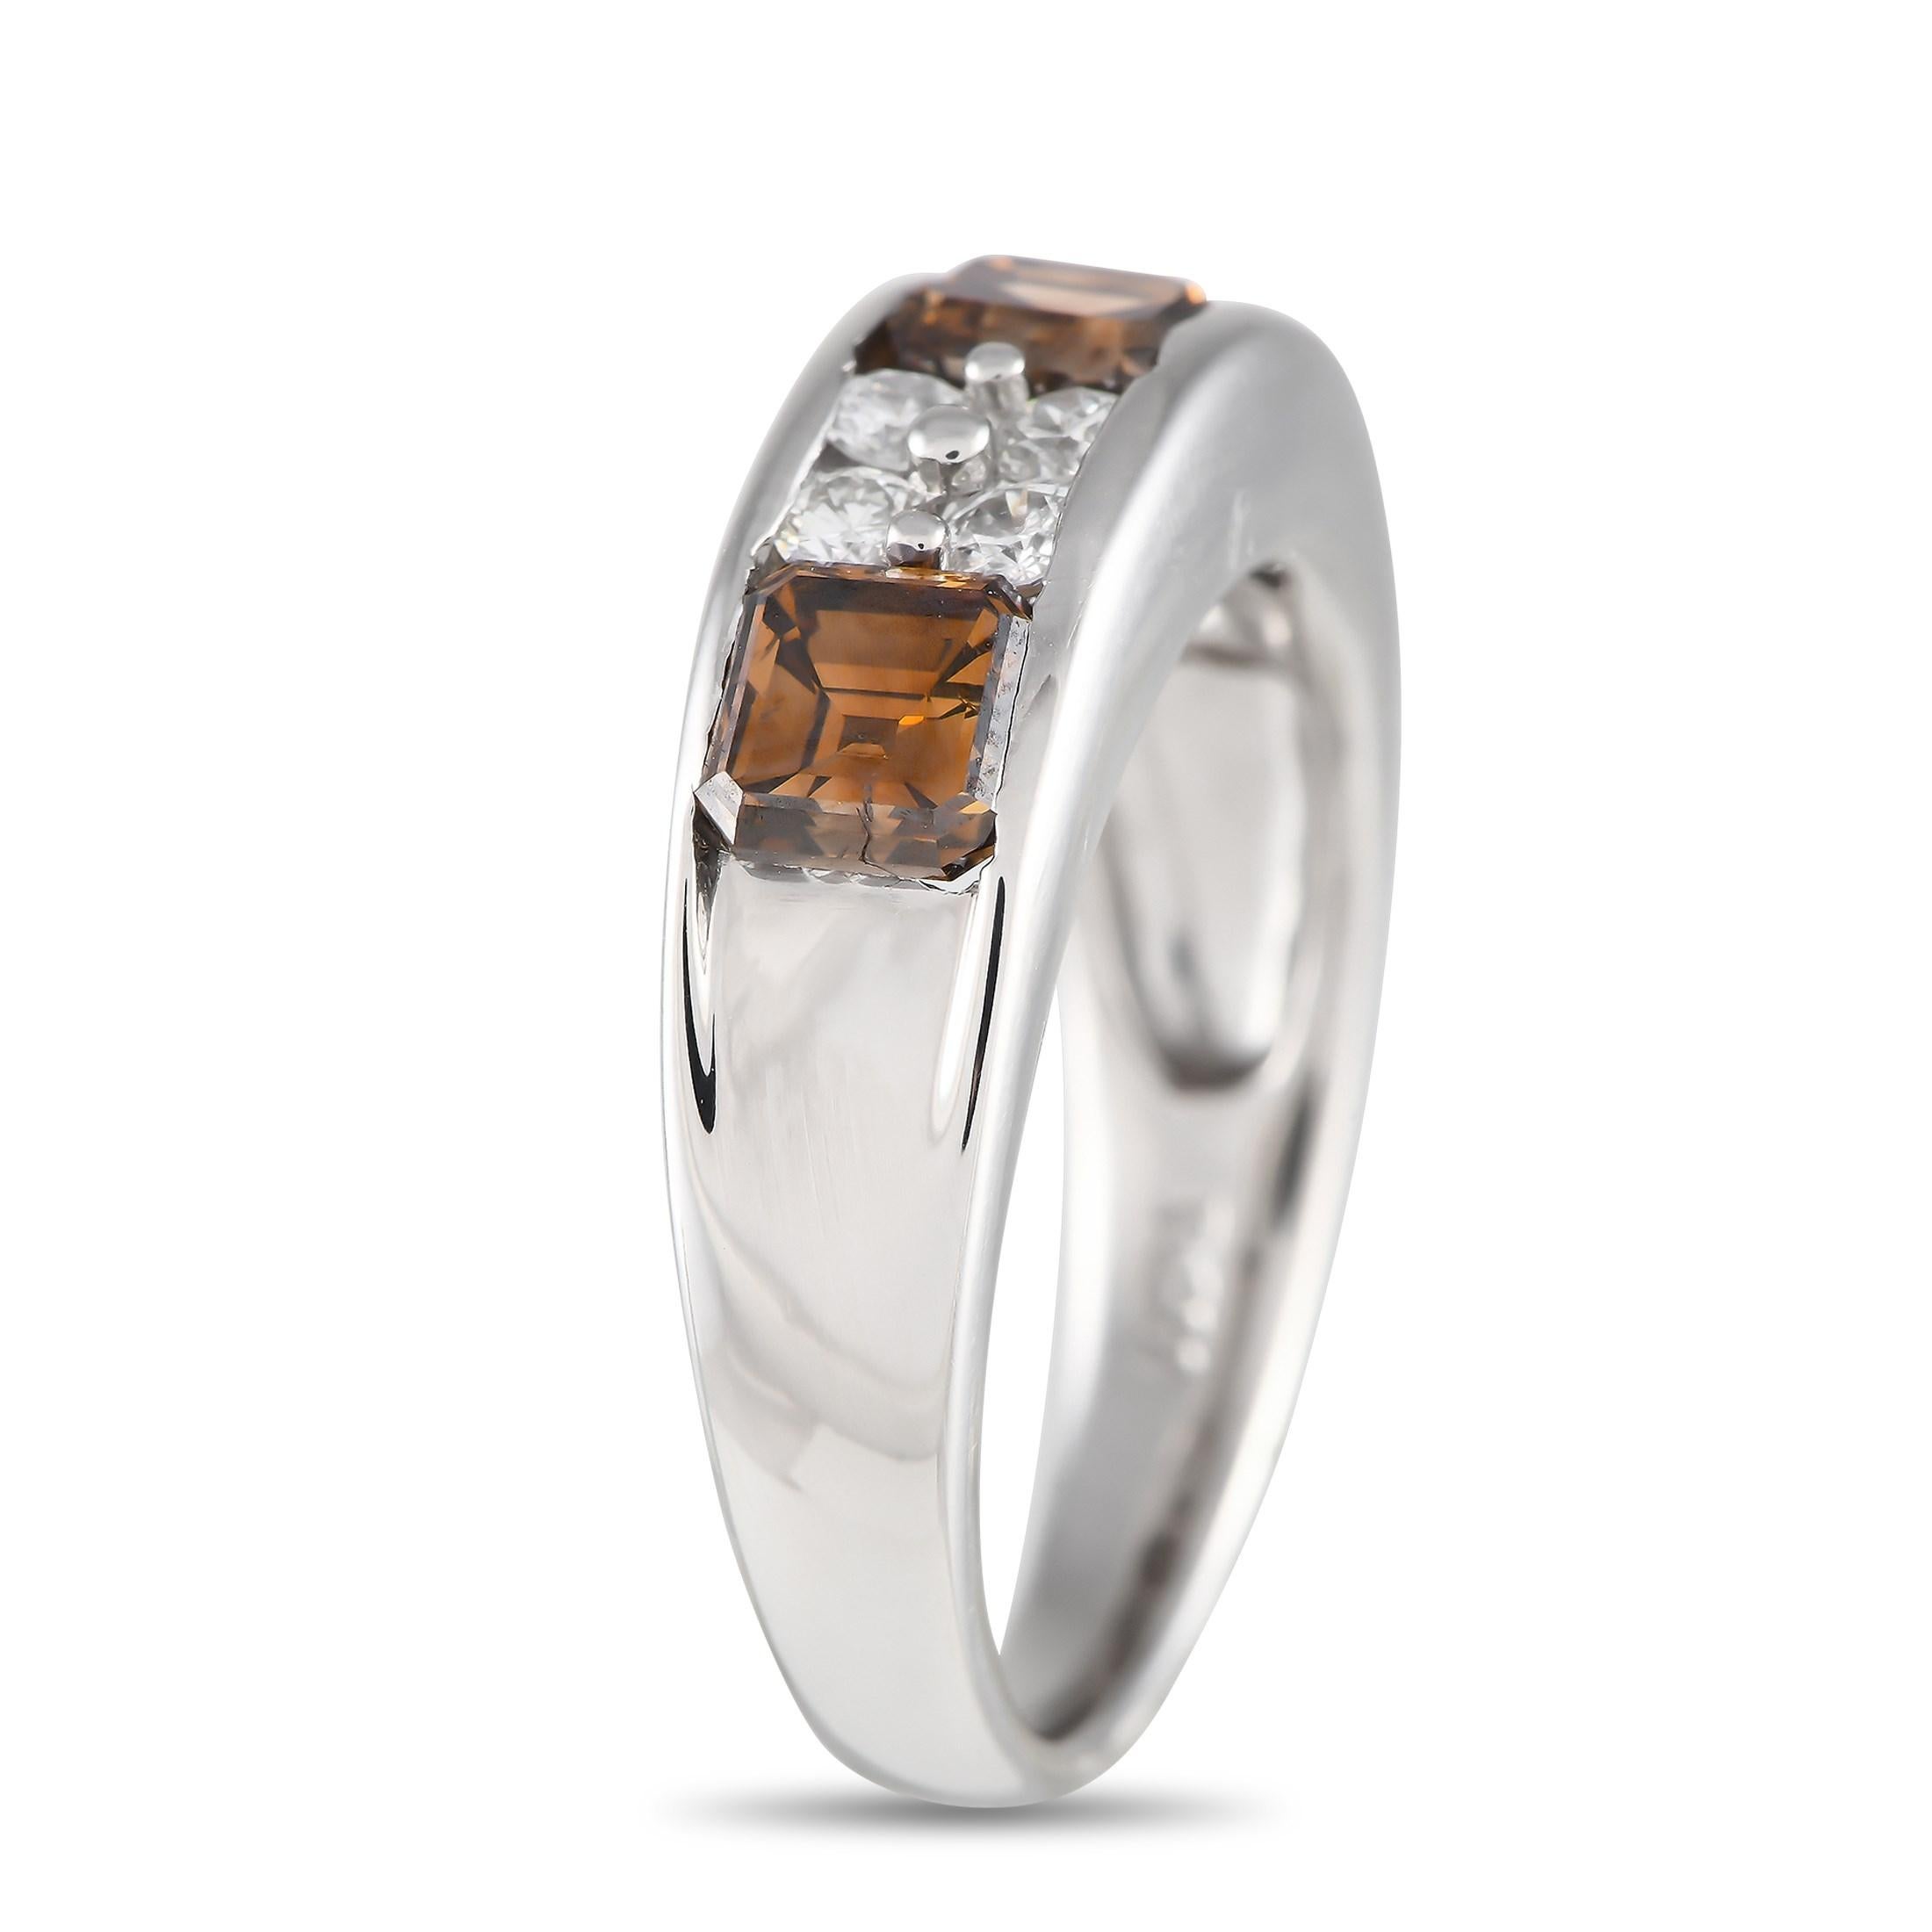 This sophisticated band ring will never go out of style. Crafted from shimmering platinum, the center of the design comes to life thanks to 2.29 carats of cognac diamonds and additional white diamond accents totaling 0.40 carats. It features a 3mm